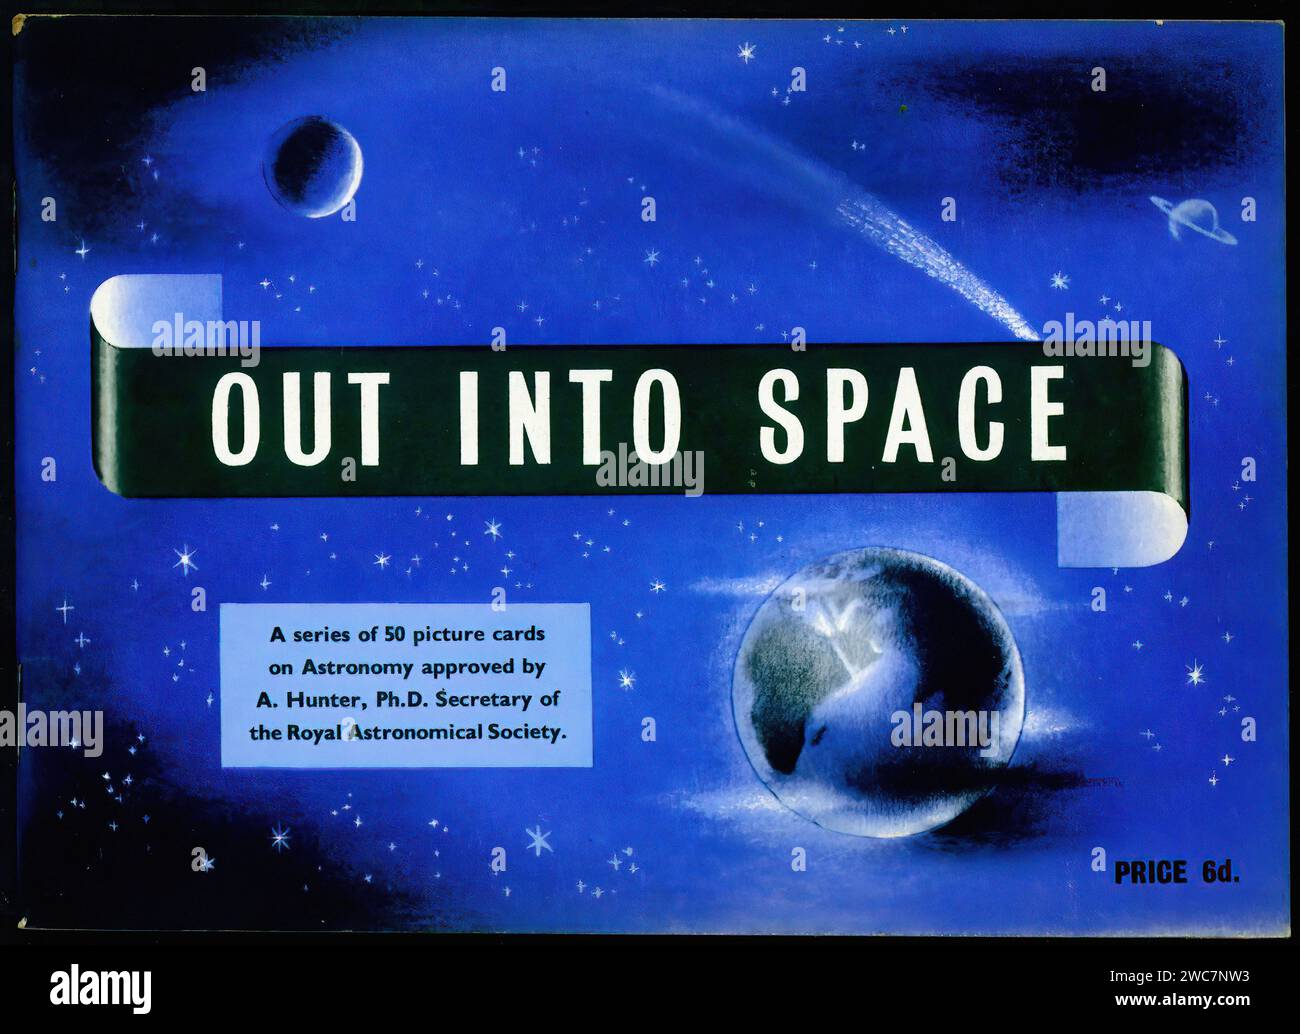 Out Into Space - Vintage Tradecard Album Front Illustration Stock Photo